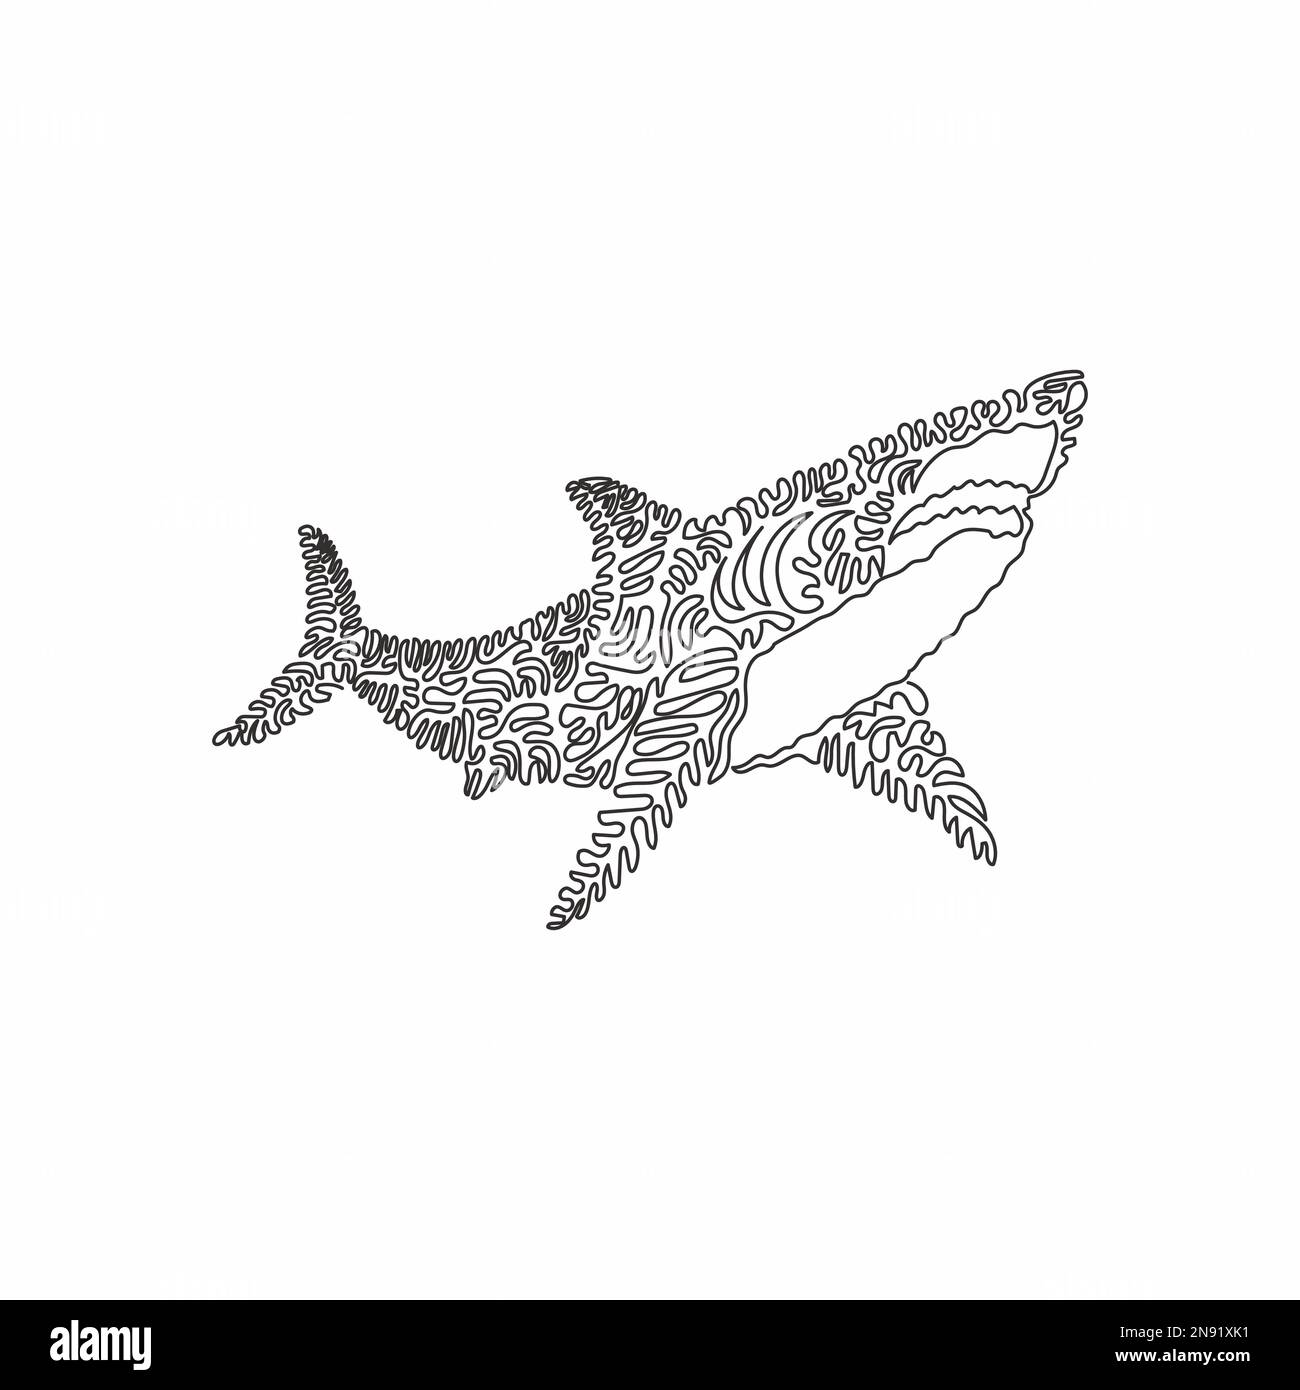 Page 12, Shark fishing Vectors & Illustrations for Free Download